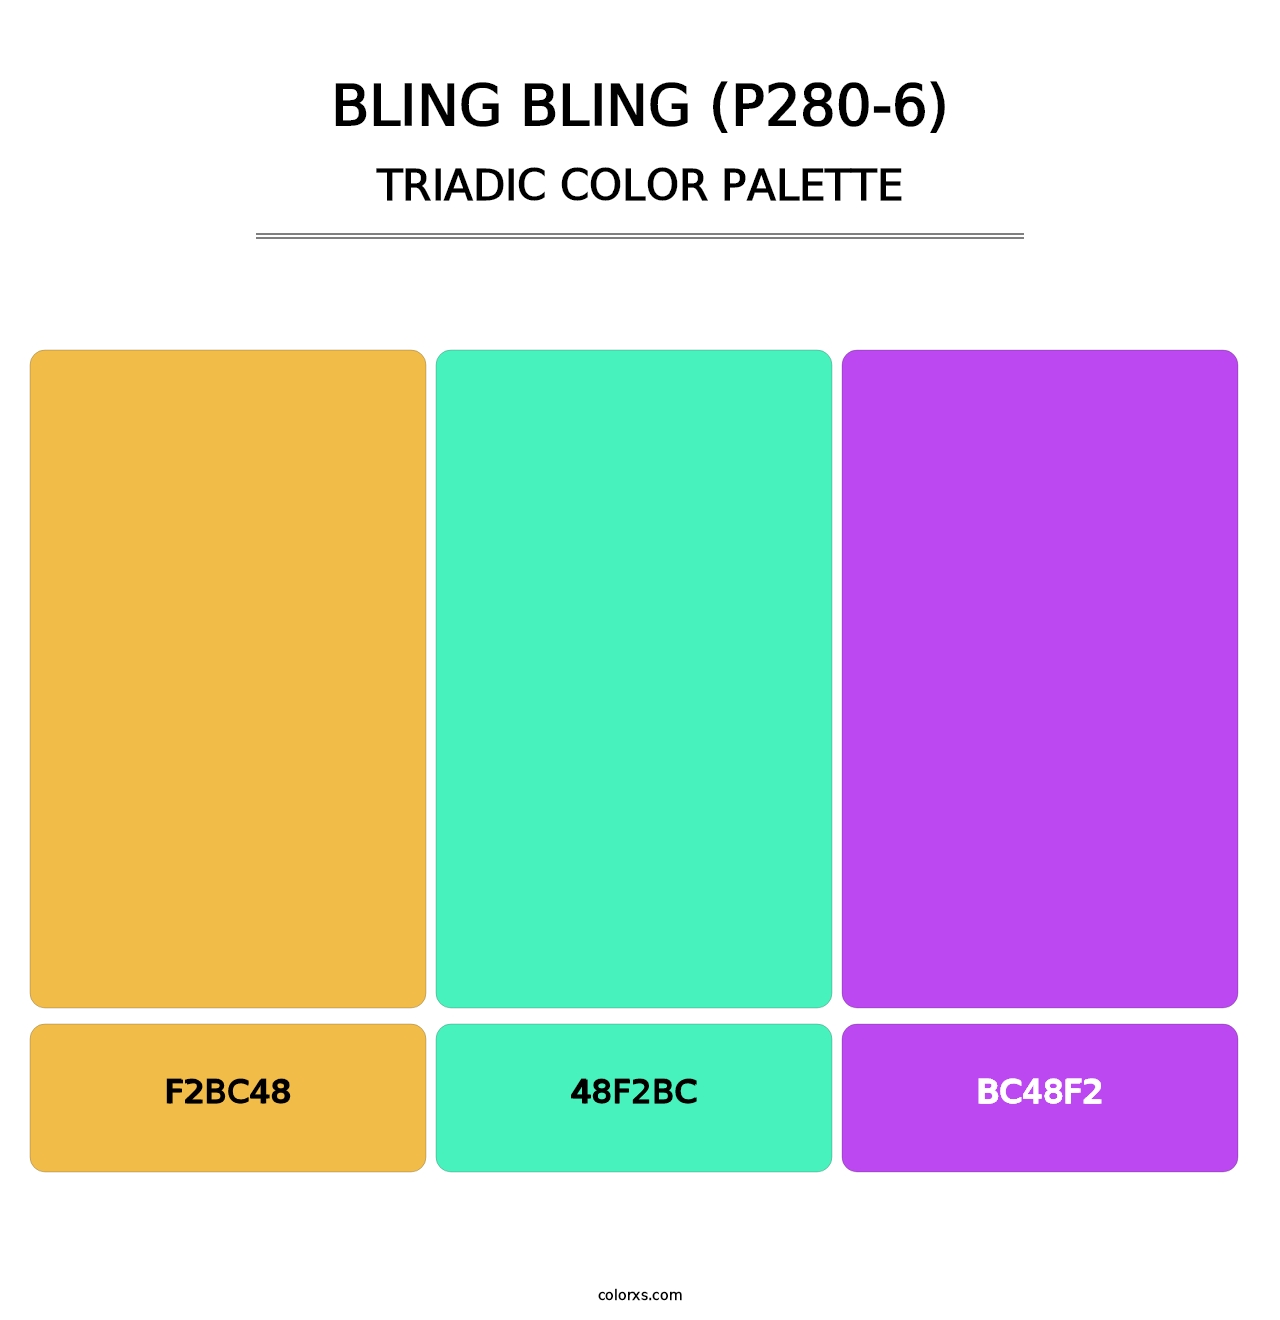 Bling Bling (P280-6) - Triadic Color Palette